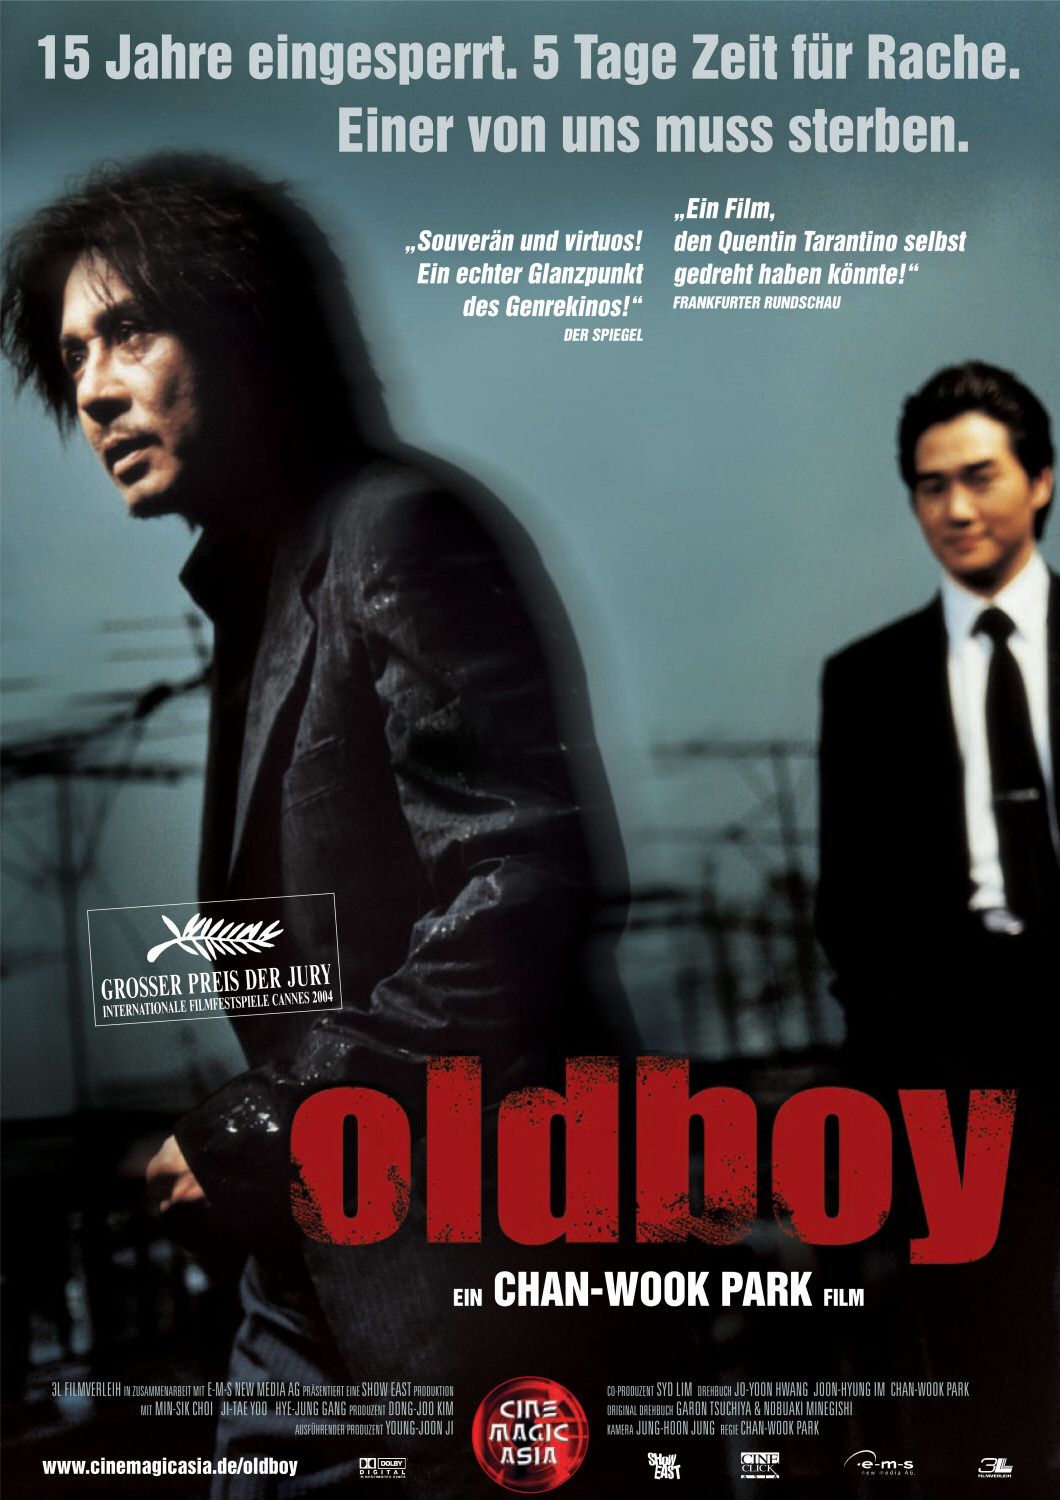 Extra Large Movie Poster Image for Oldboy (#5 of 7)